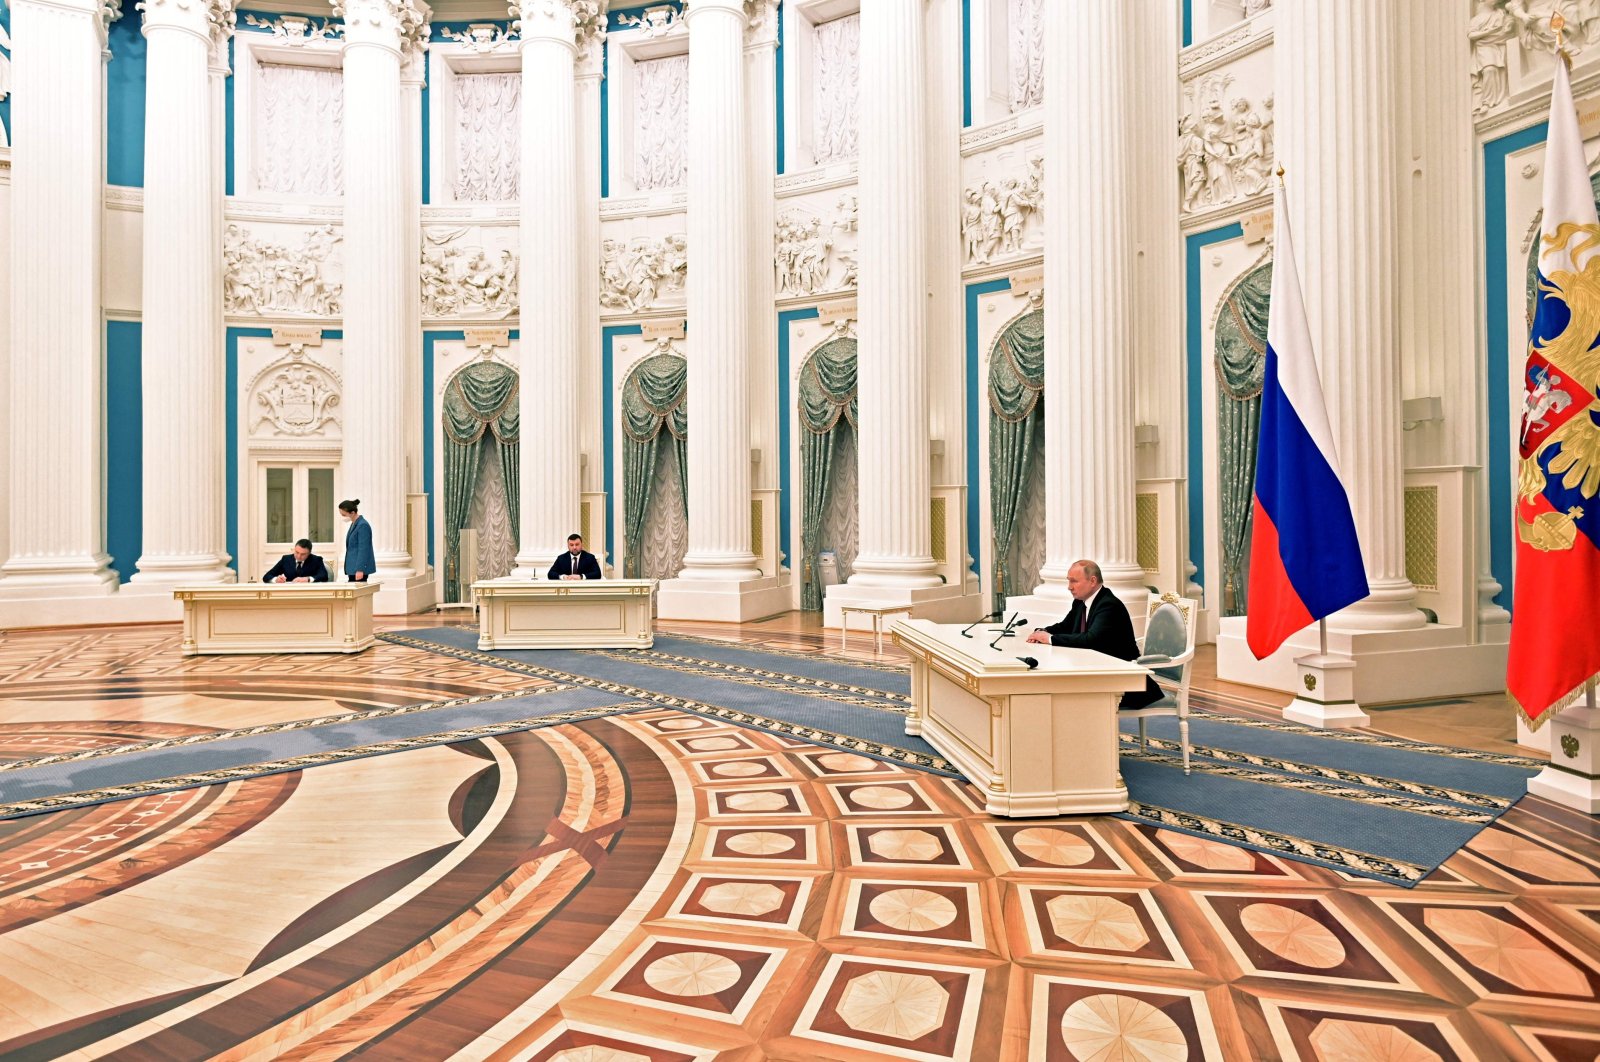 Russian President Vladimir Putin (R) attends a ceremony to sign documents, including a decree recognising two Russian-backed breakaway regions in eastern Ukraine as independent, with the leaders of the self-proclaimed republics Leonid Pasechnik (L) and Denis Pushilin (C) during a ceremony at the Kremlin in Moscow, Russia, Feb. 21, 2022. (AFP Photo)